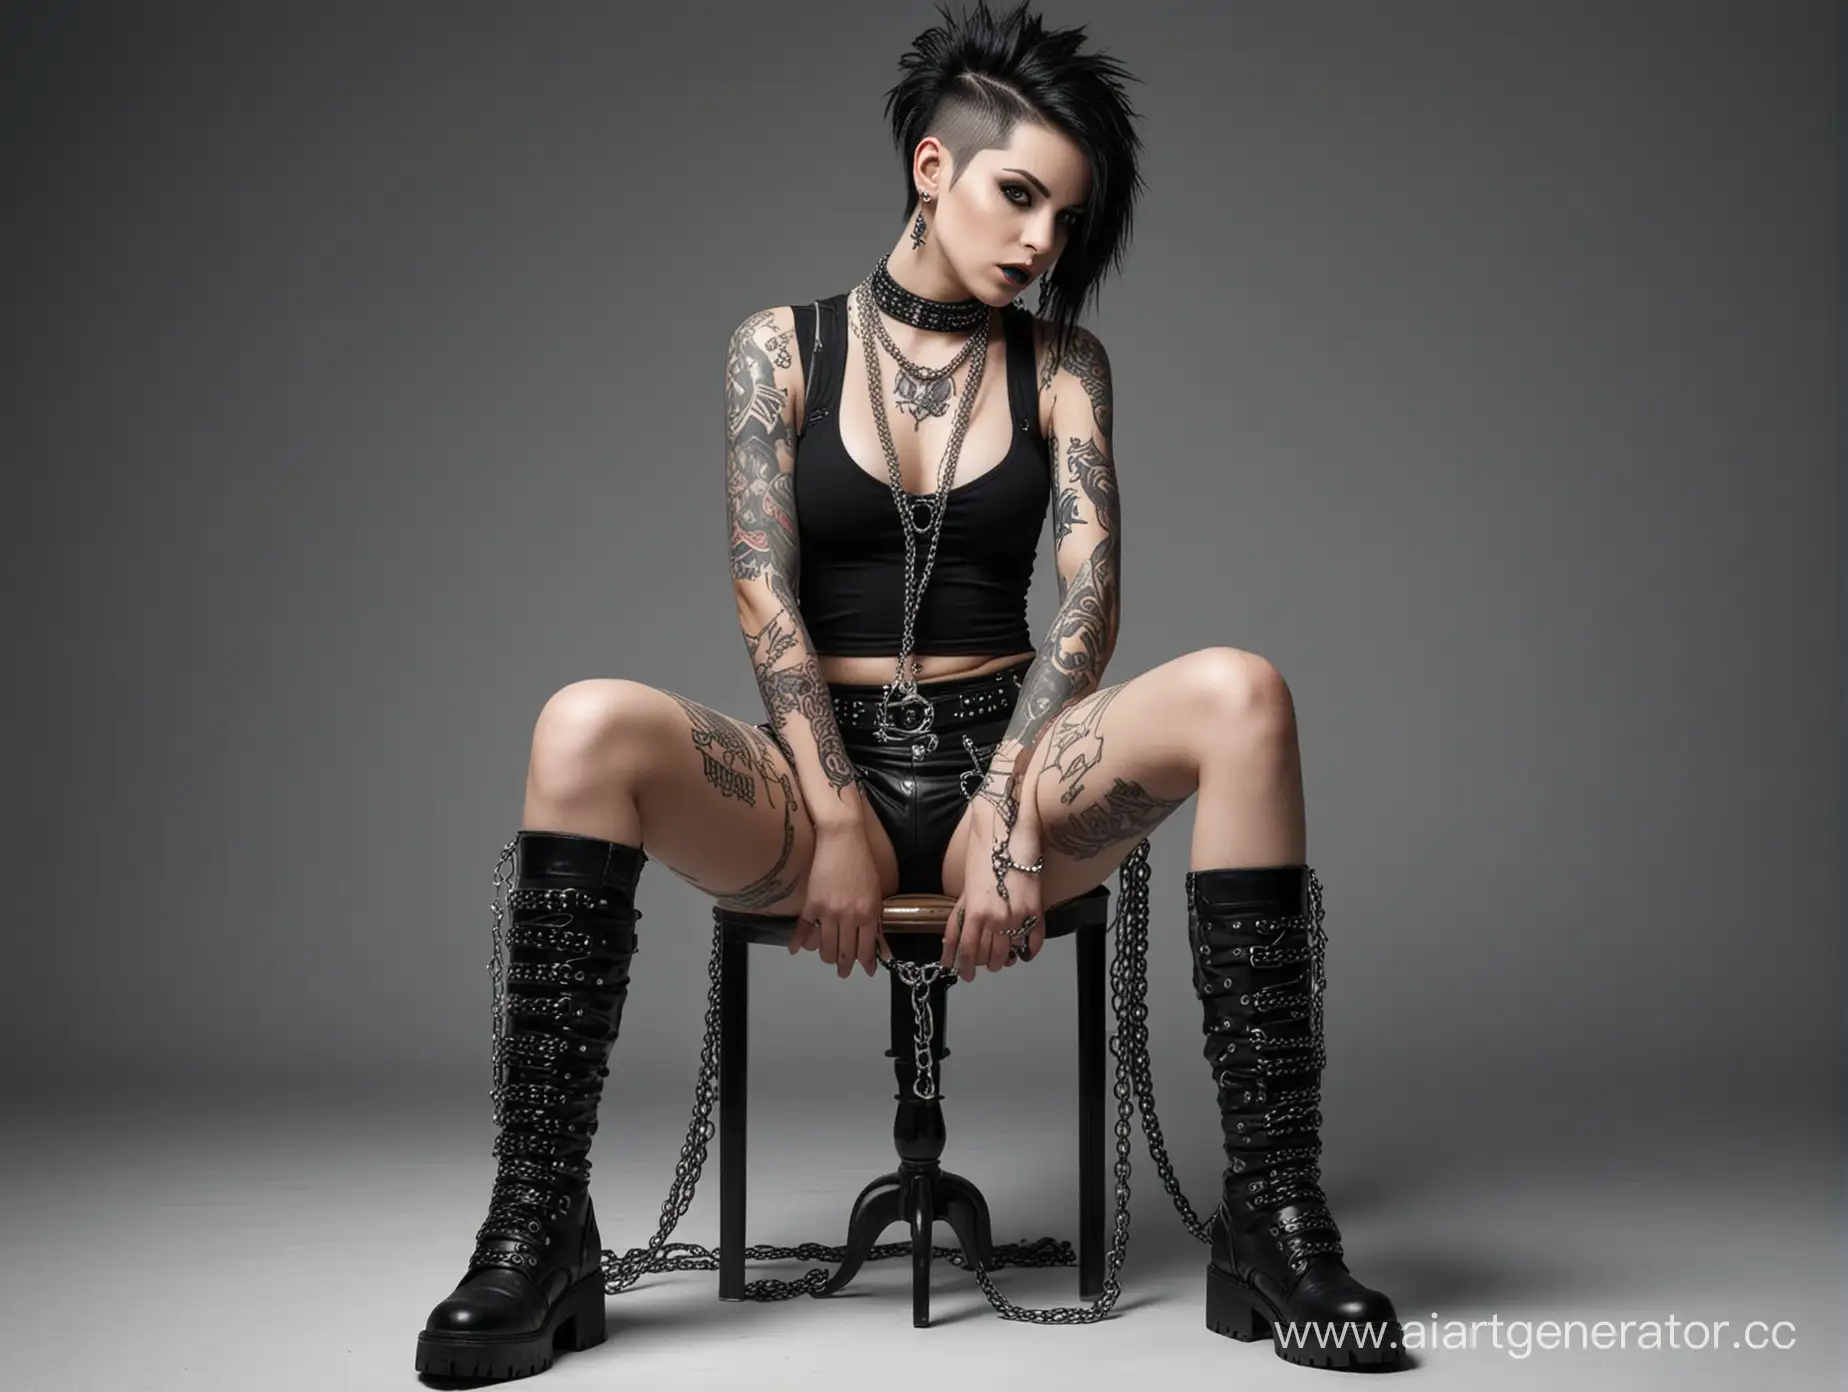 Gothic-Punk-Girl-with-Shaved-Temple-and-Chains-Dark-Subculture-Fashion-Portrait